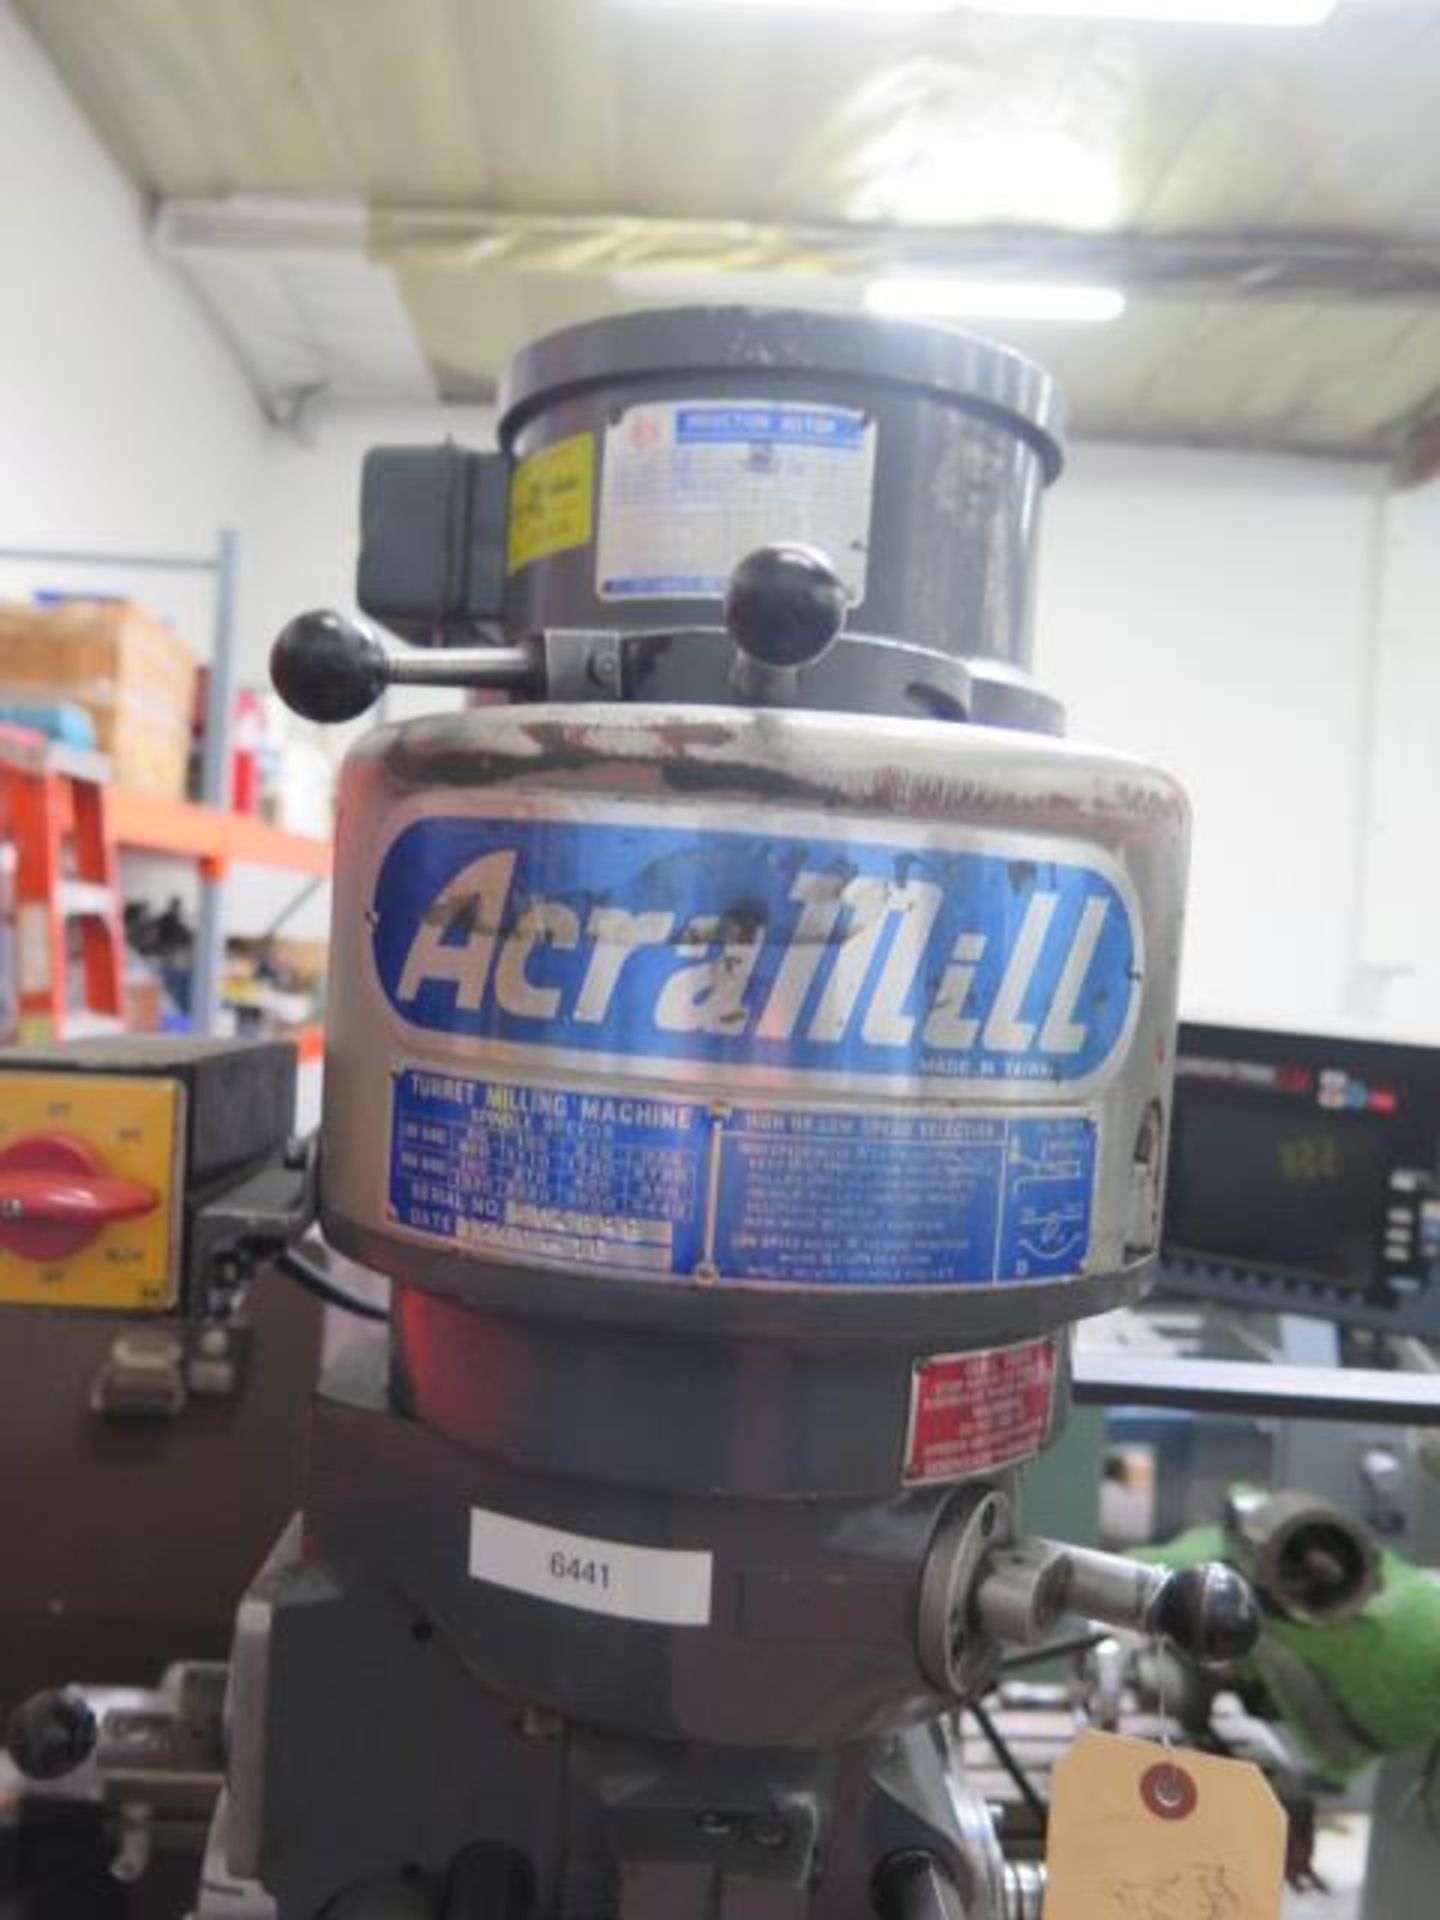 Acra Mill Vertical Mill s/n 504689 w/ Mitutoyo KS Counter Programmable DRO, 2Hp Motor, 80-5440 - Image 3 of 12